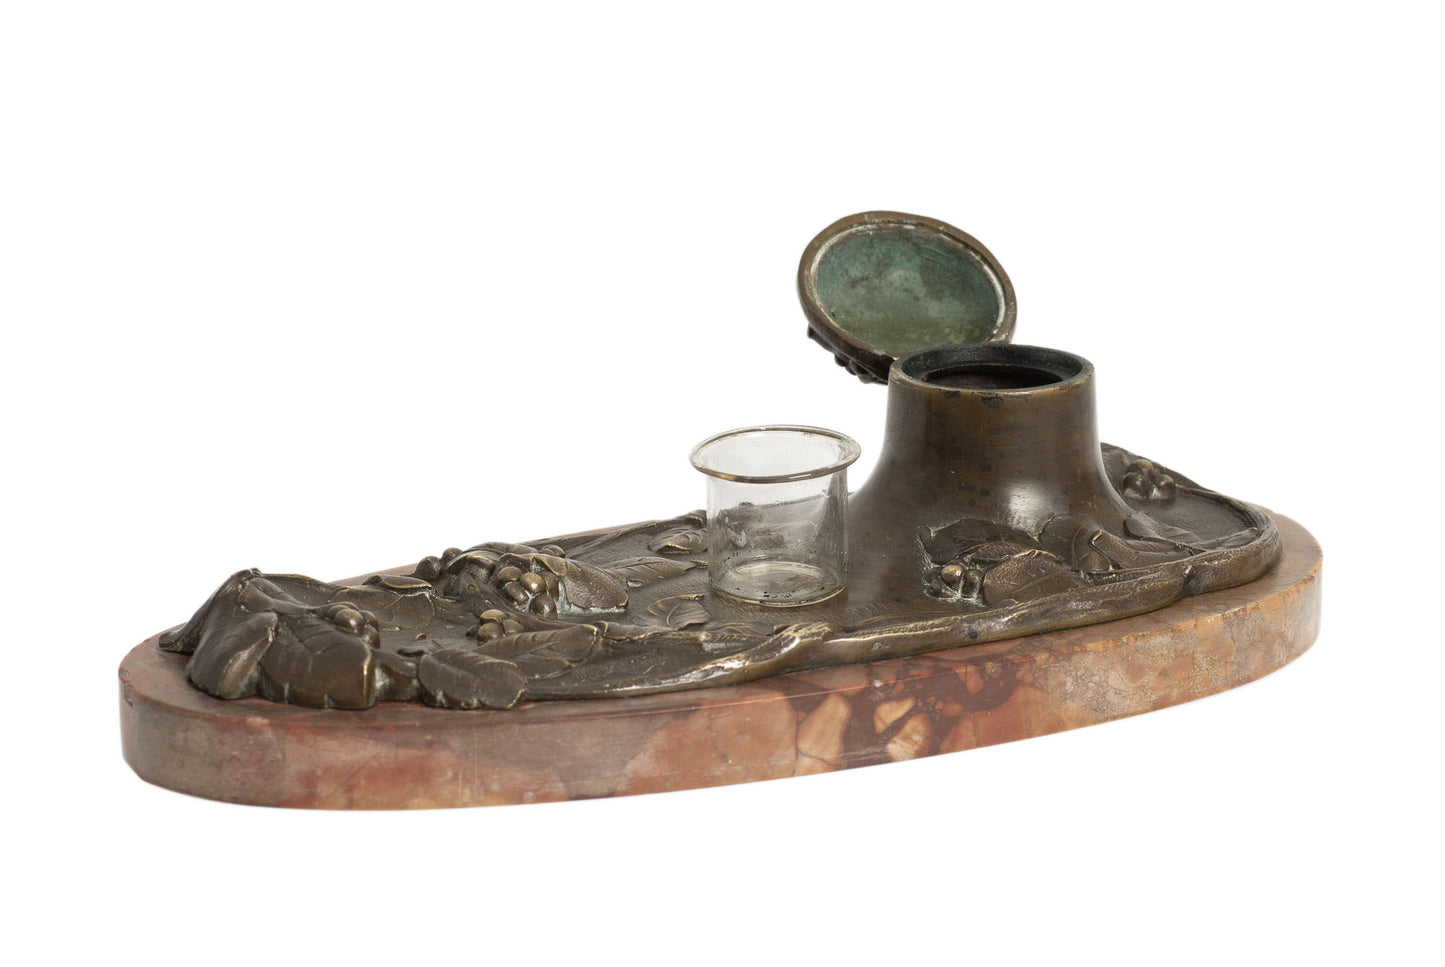 Antique French Bronze and Antico Rosso Marble Desk Ink Stand / Inkwell c1890 - Marcel Bonnot (2960)